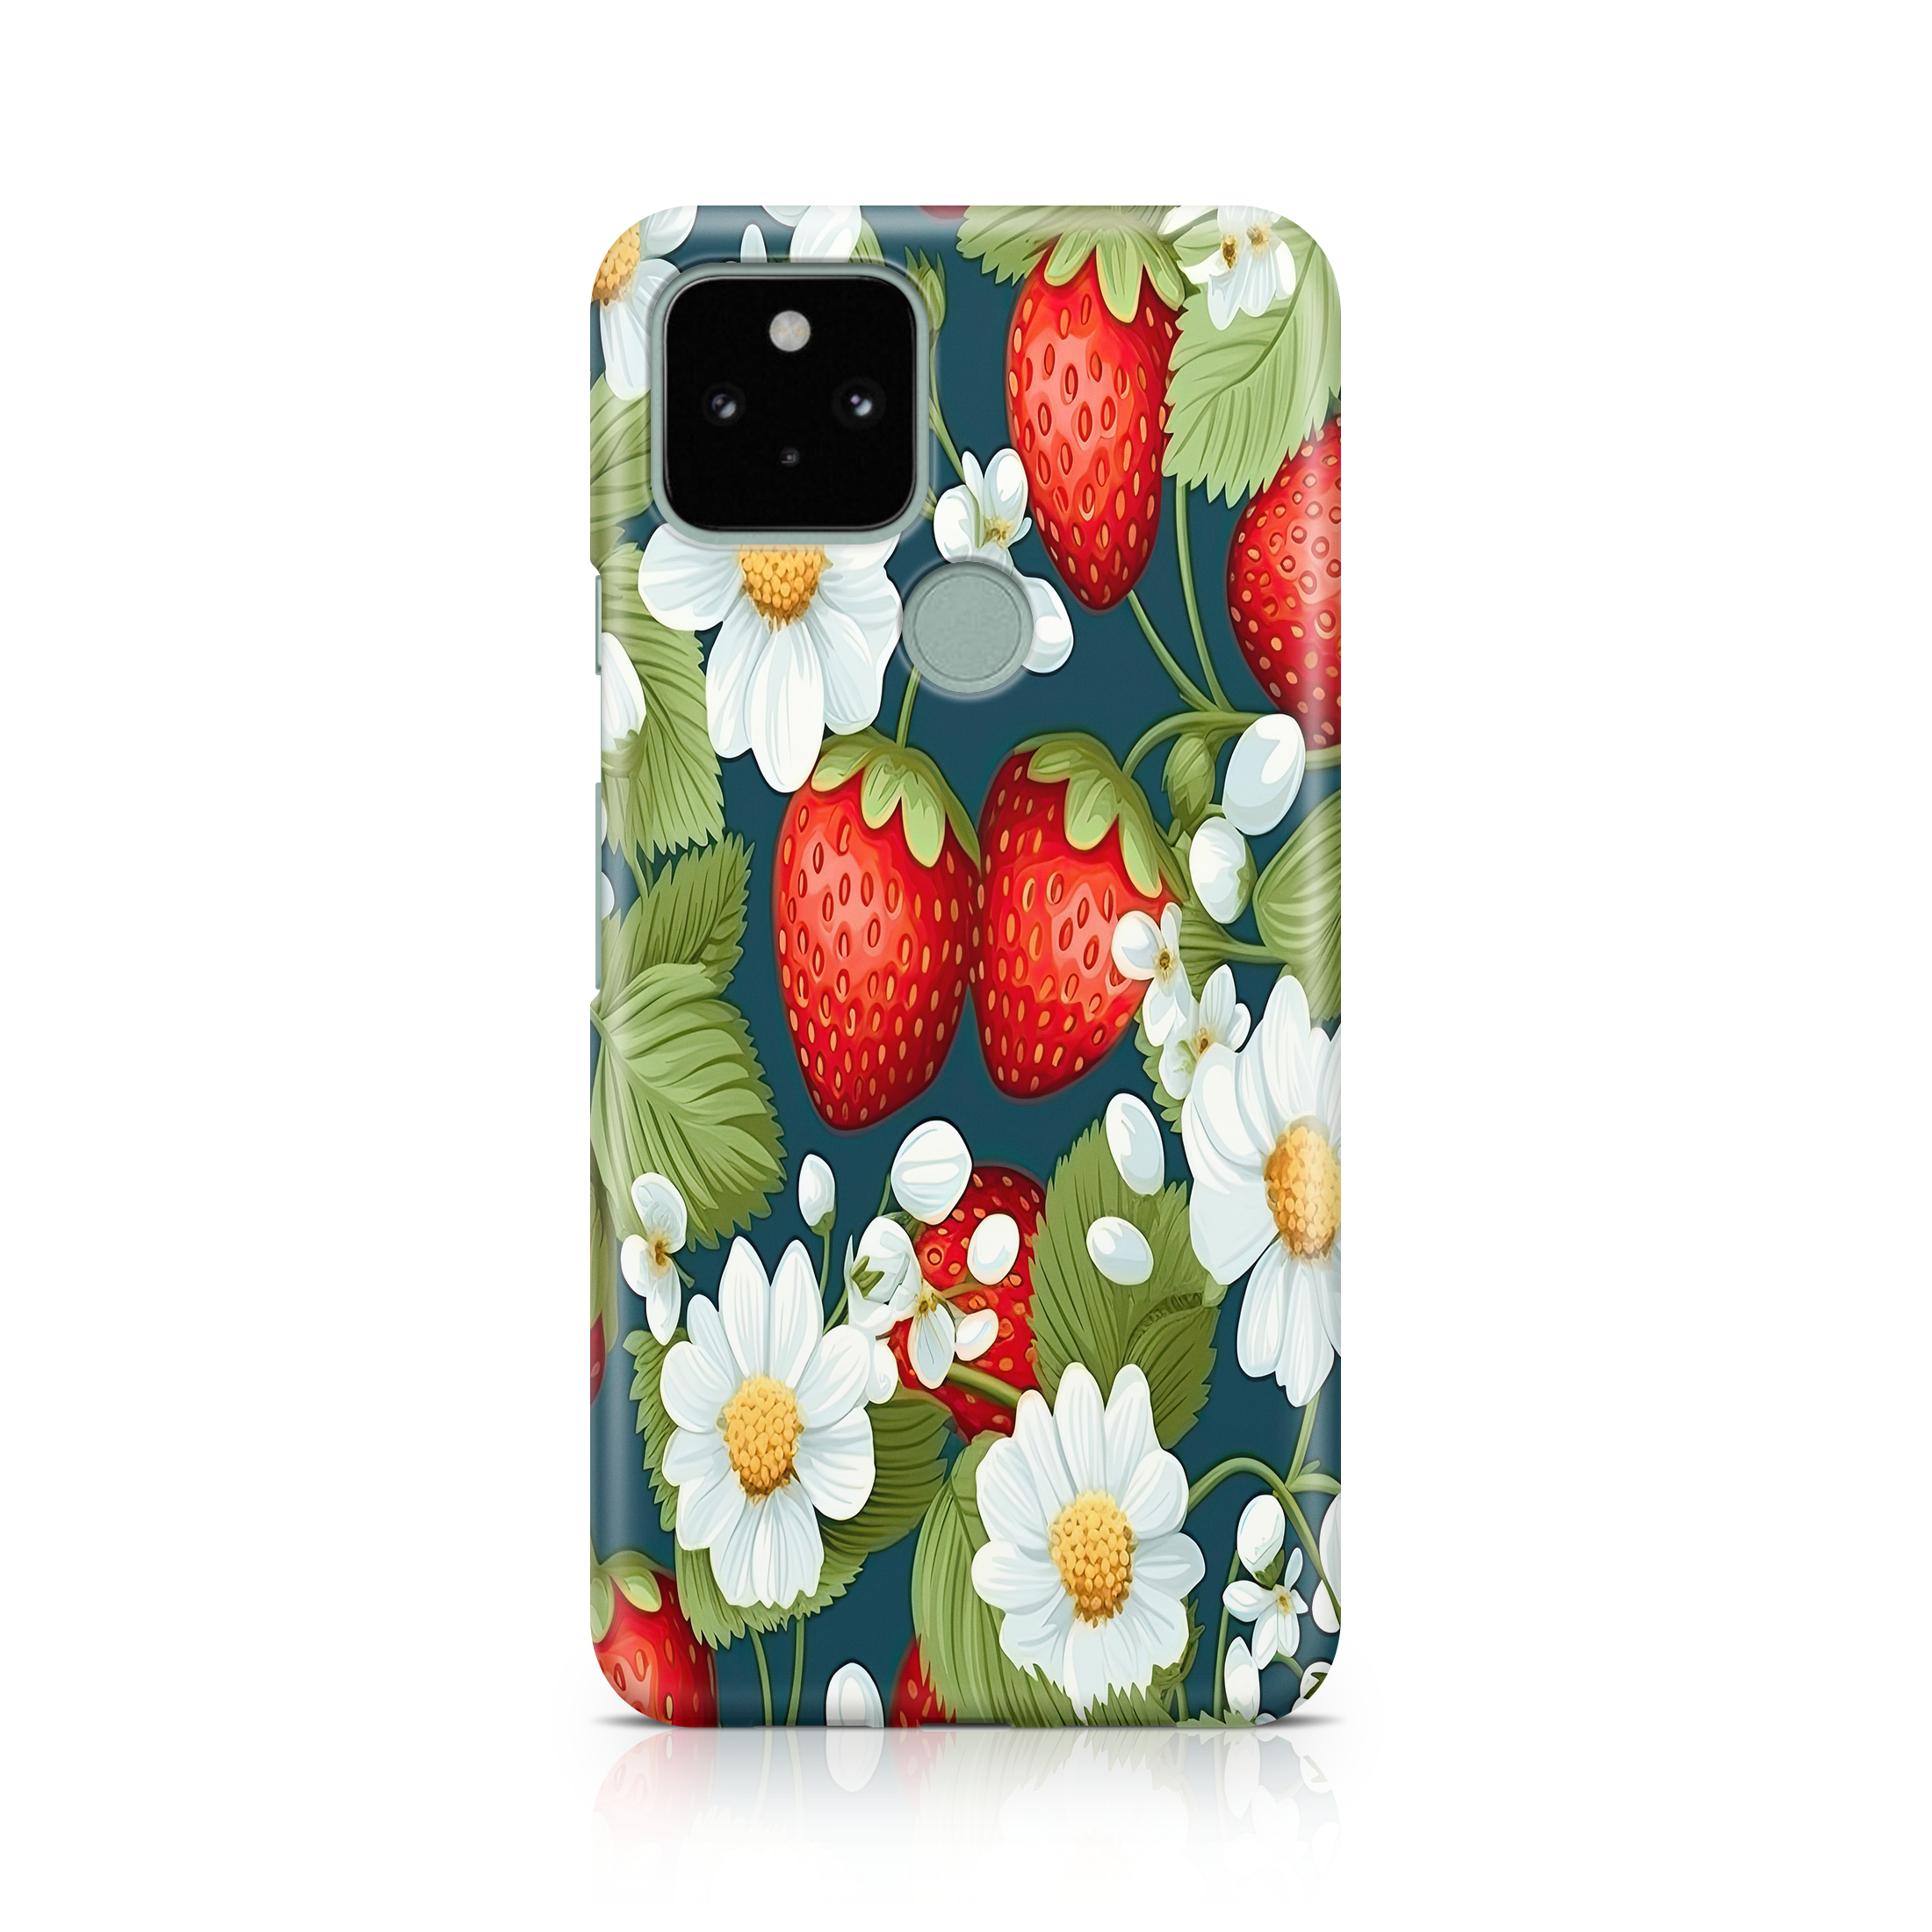 Strawberry Vine Oasis - Google phone case designs by CaseSwagger